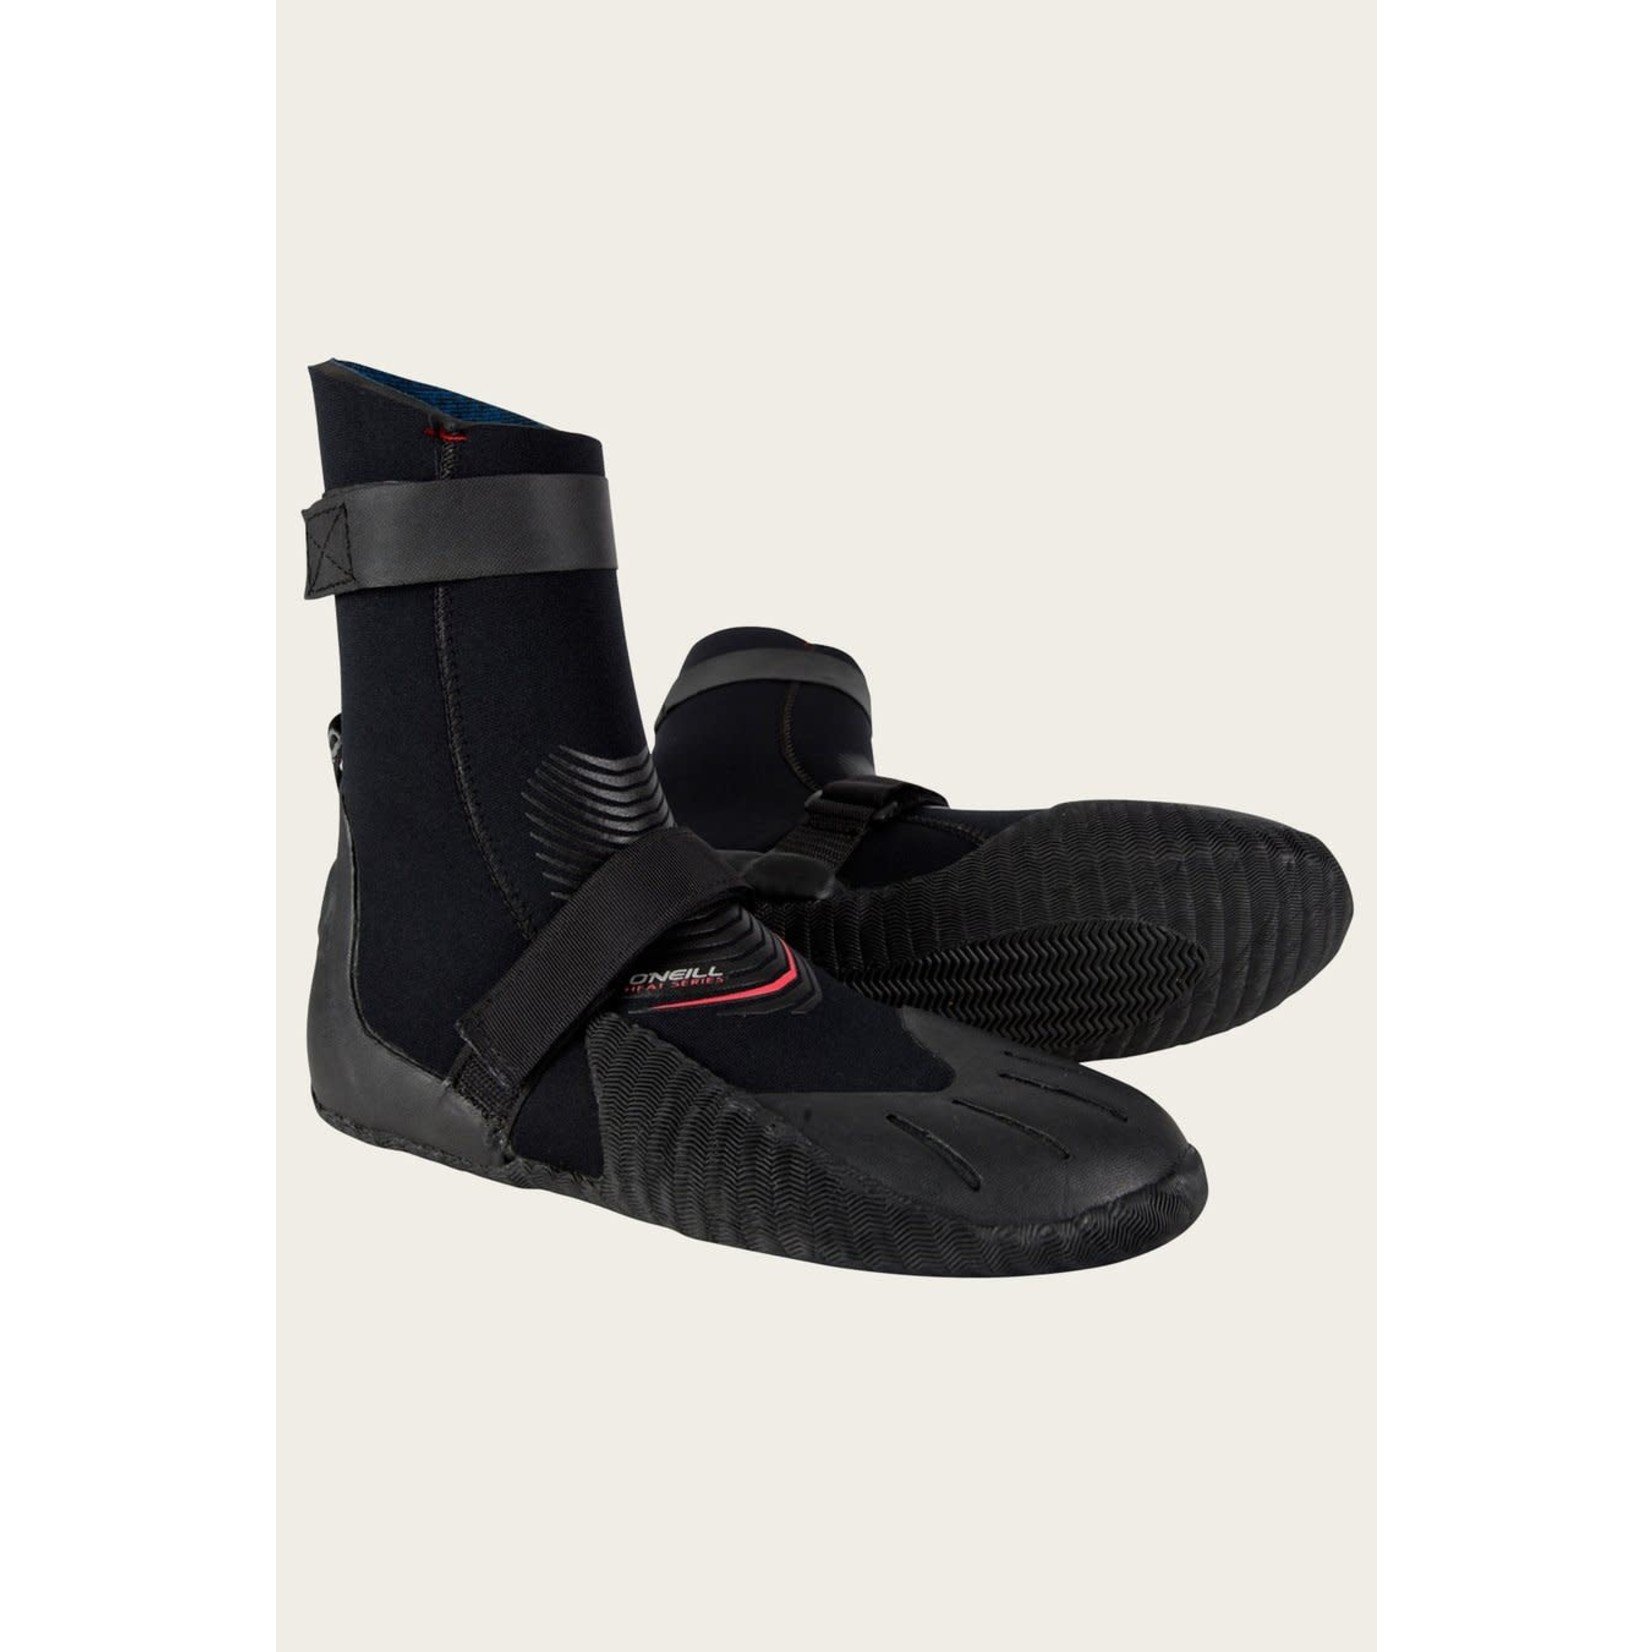 O'Neill Wetsuit RT Booties